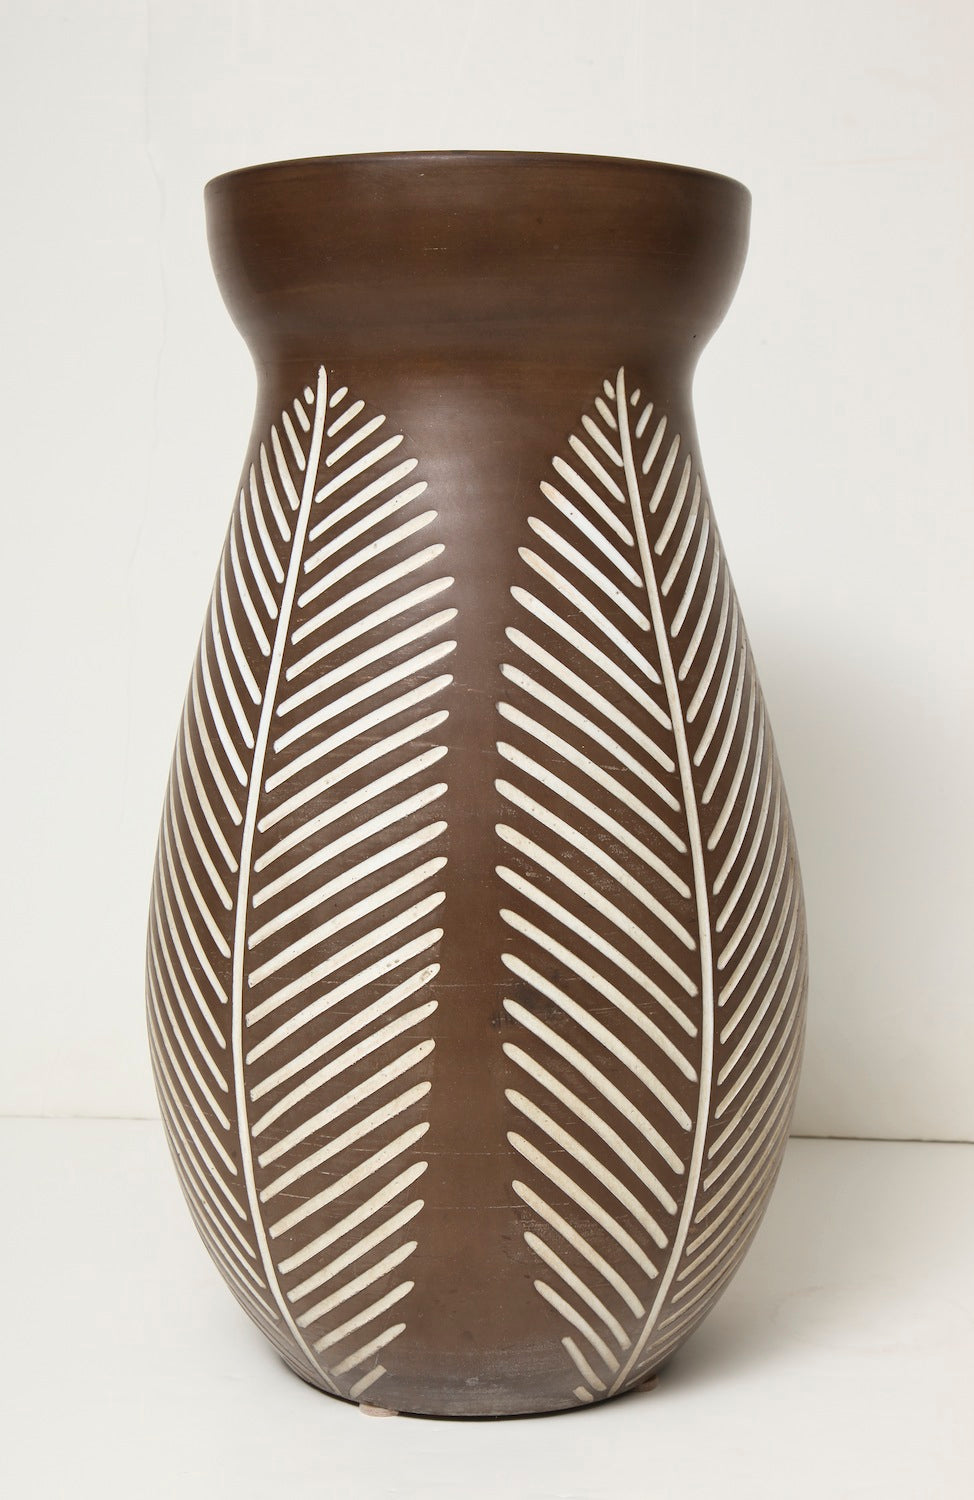 Large Scale Ceramic Vase By Zaccagnini